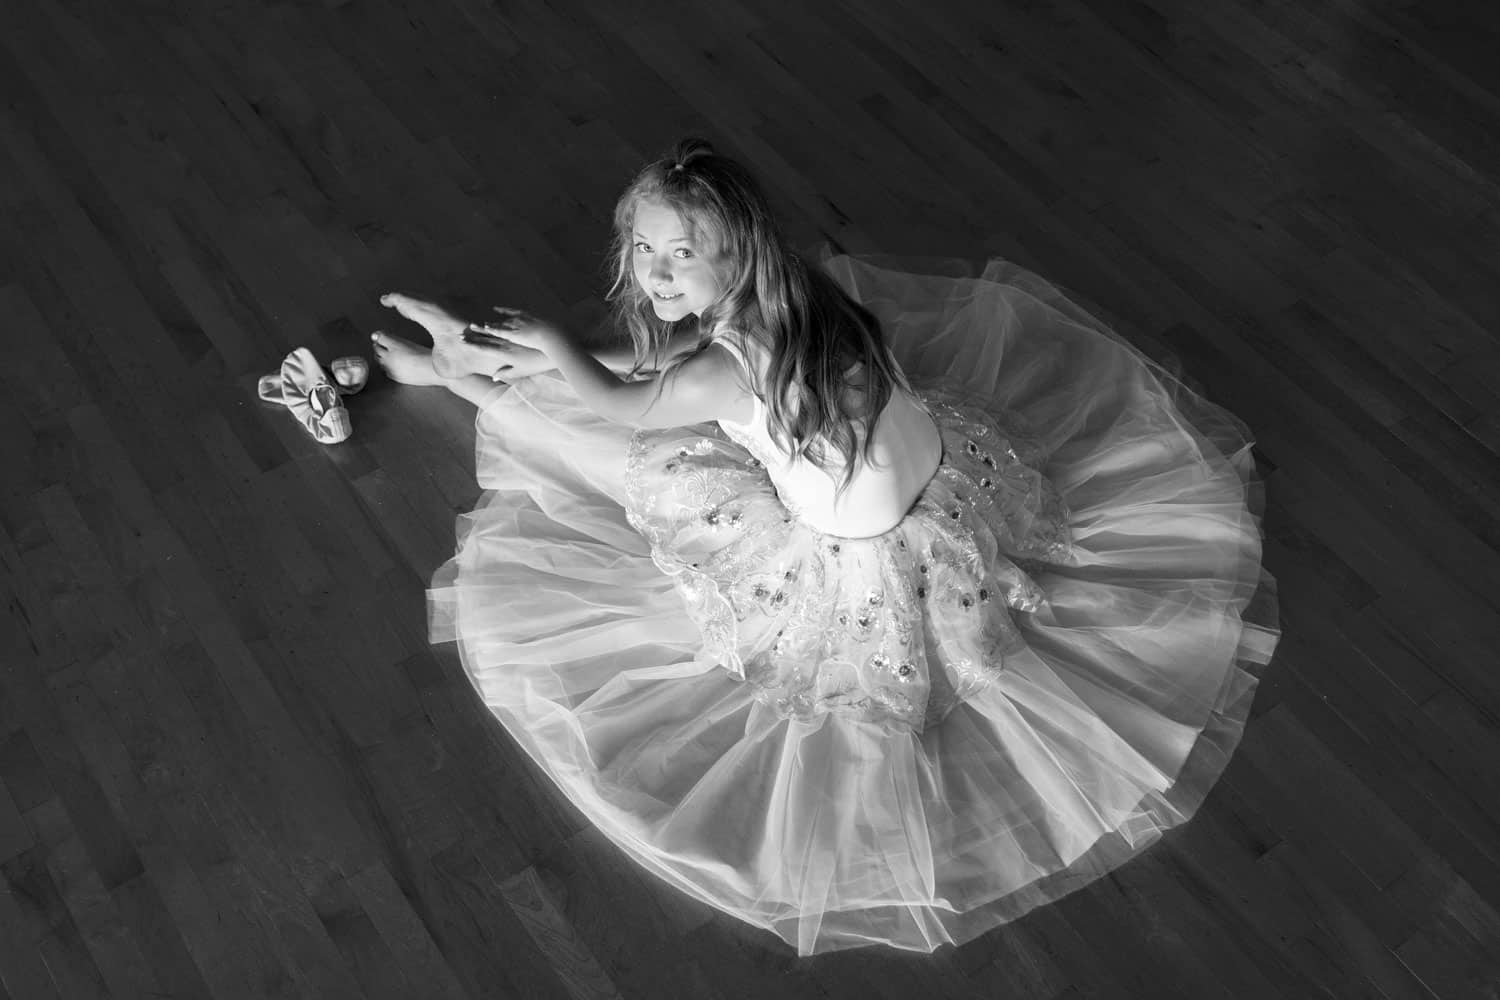 Black and white picture of a ballerina in a white tutu posing on a dance floor.